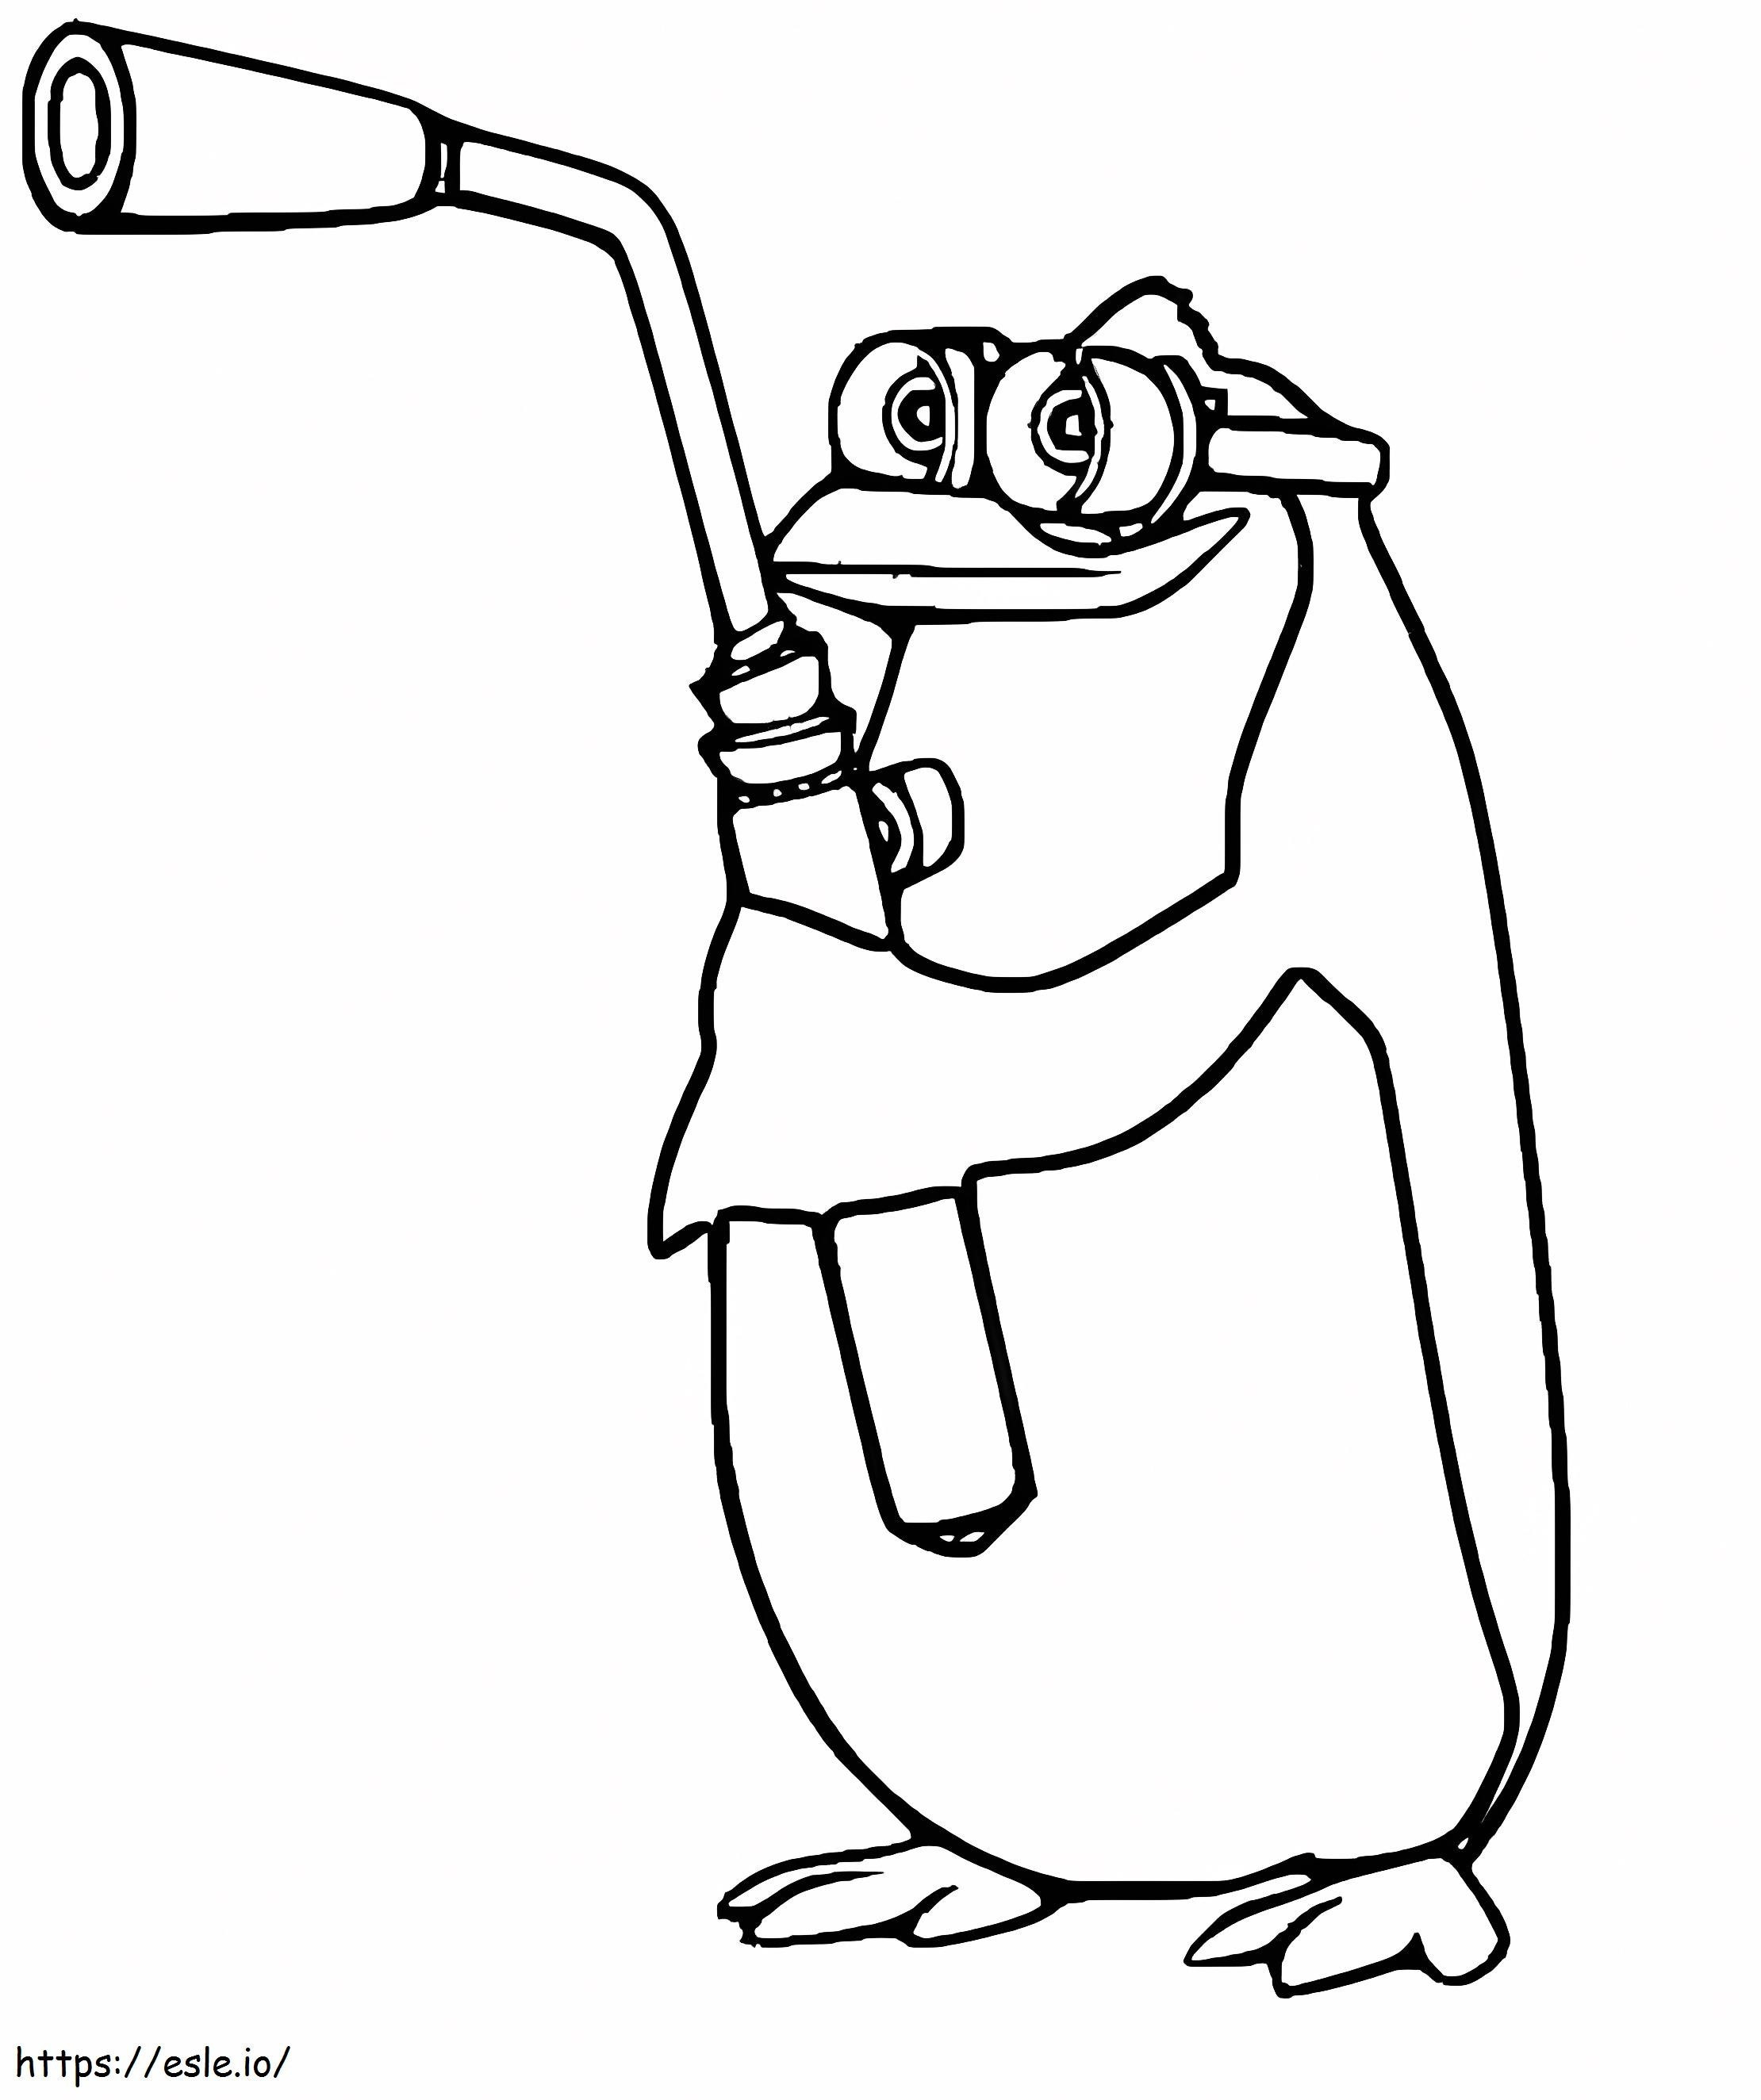 Private Penguin coloring page